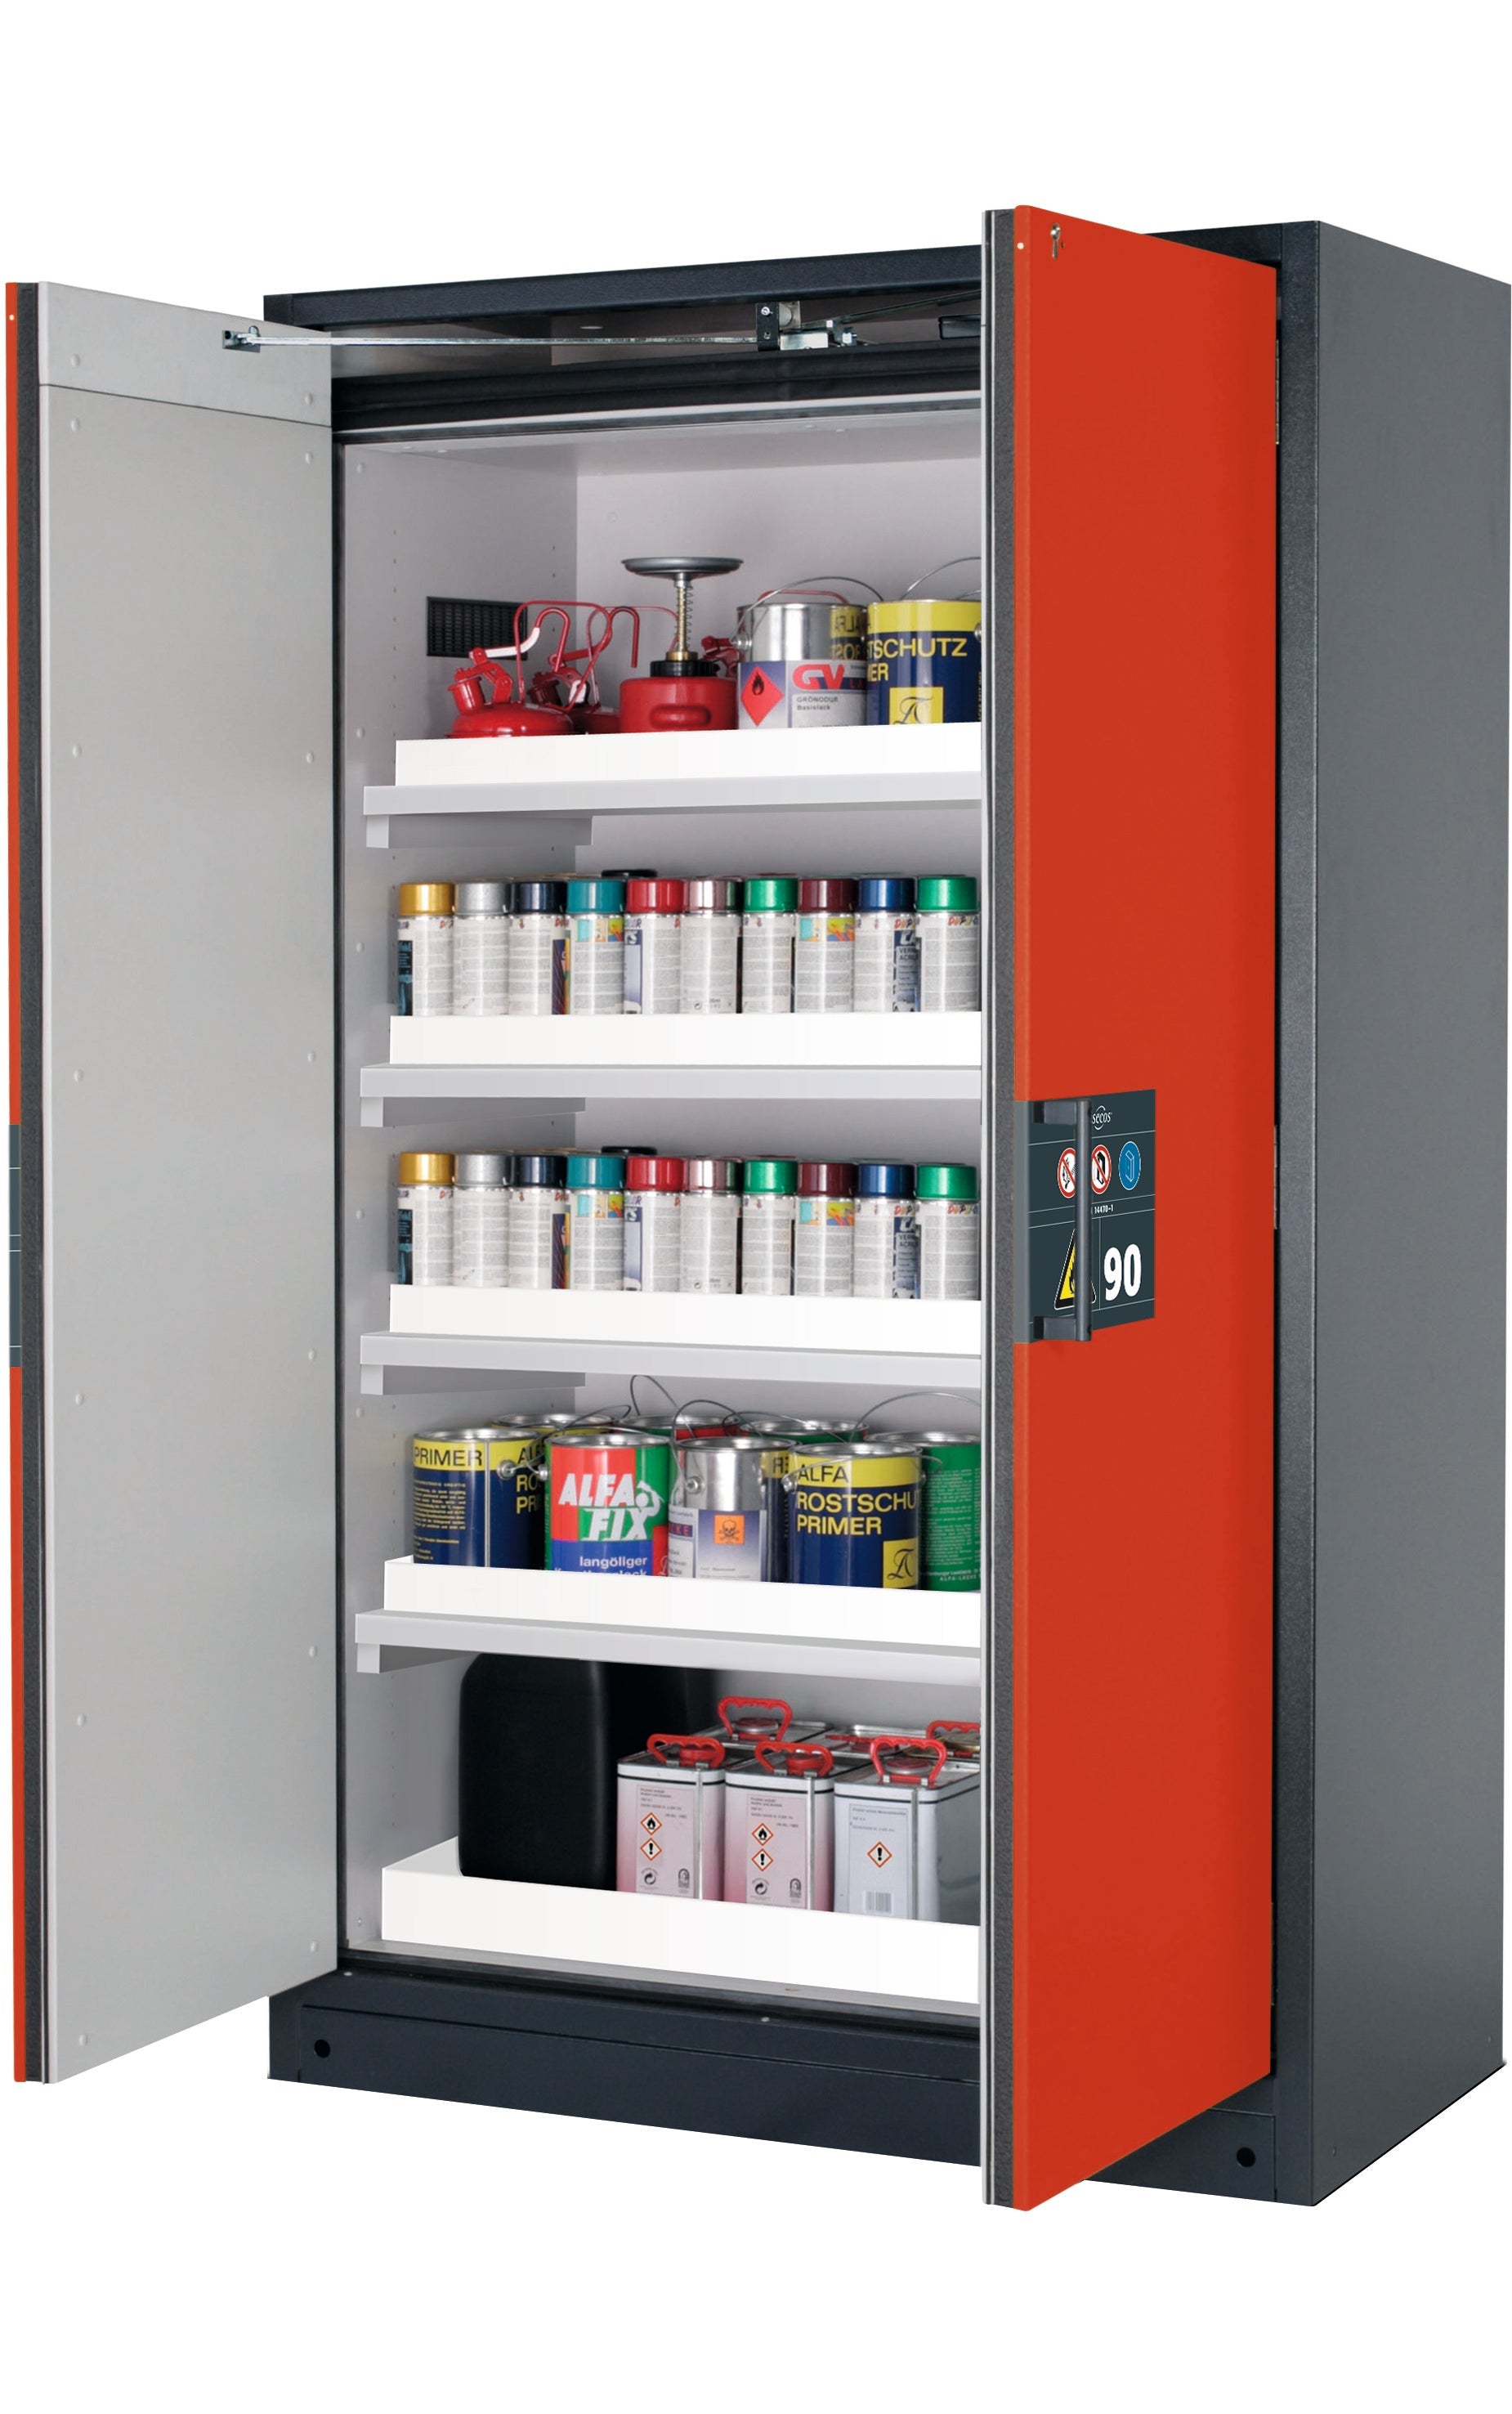 Type 90 safety storage cabinet Q-PEGASUS-90 model Q90.195.120.WDAC in traffic red RAL 3020 with 4x tray shelf (standard) (polypropylene),